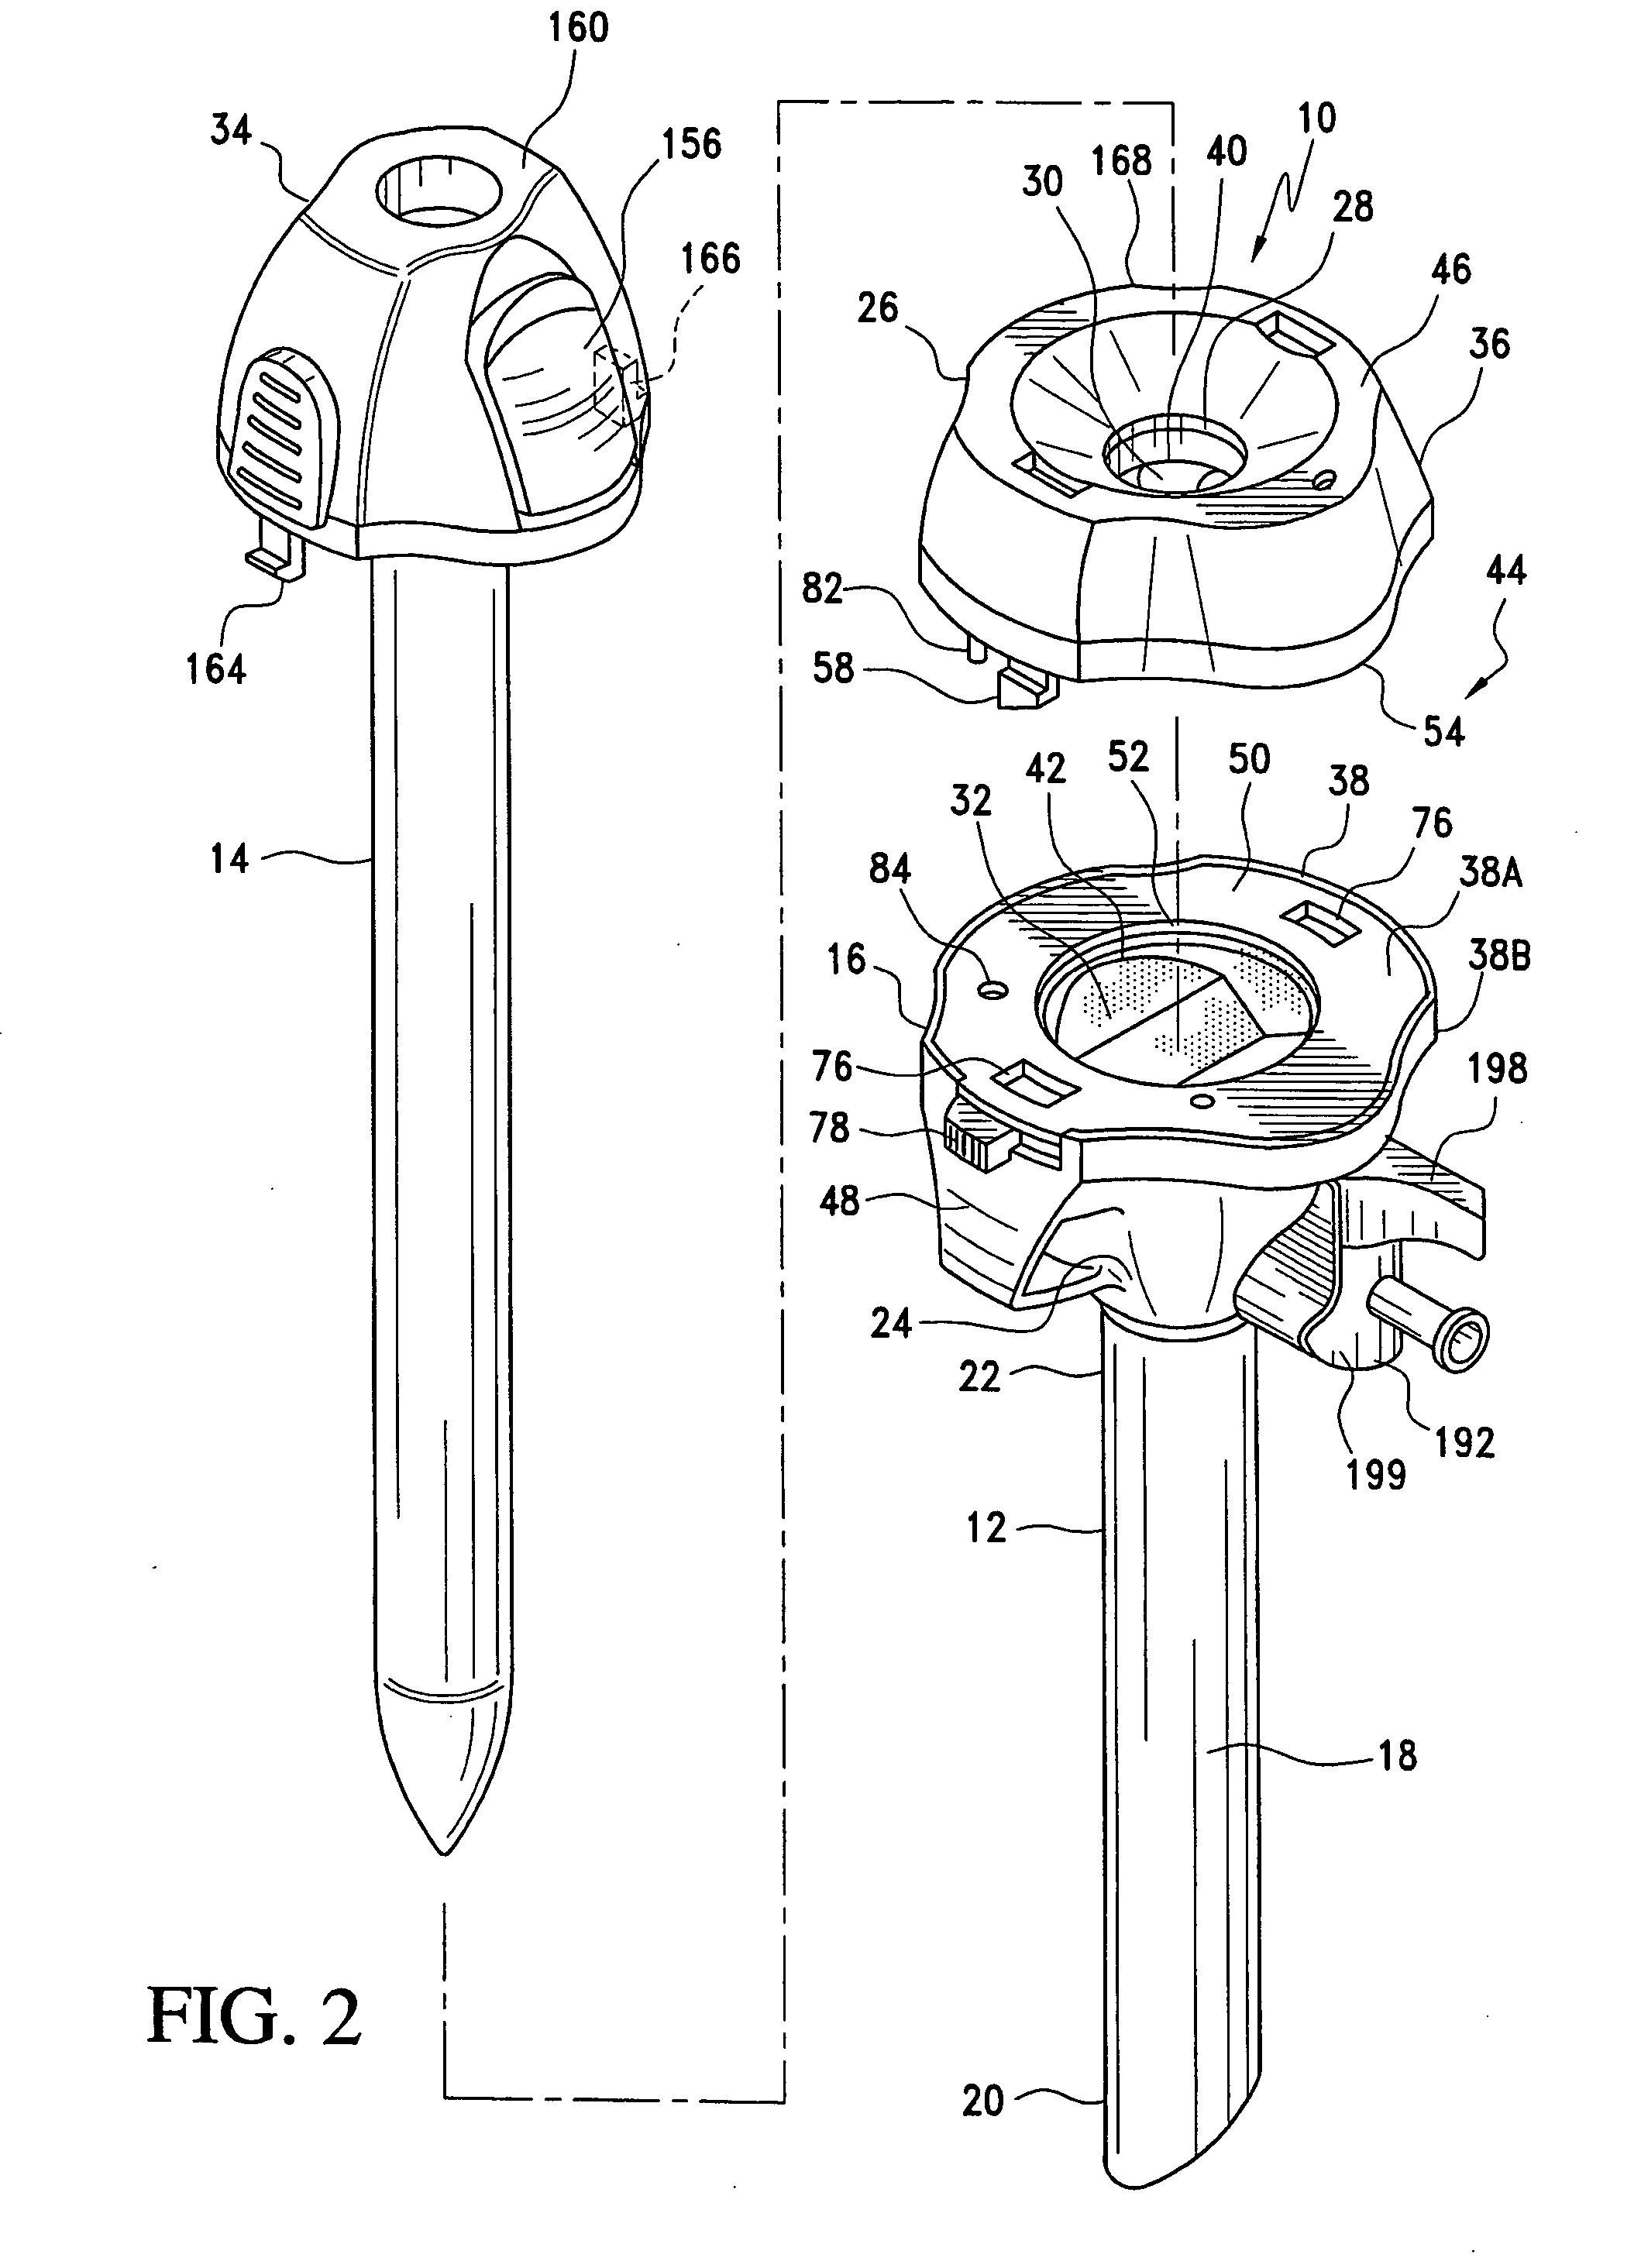 Low-profile, recessed stop-cock valve for trocar assembly